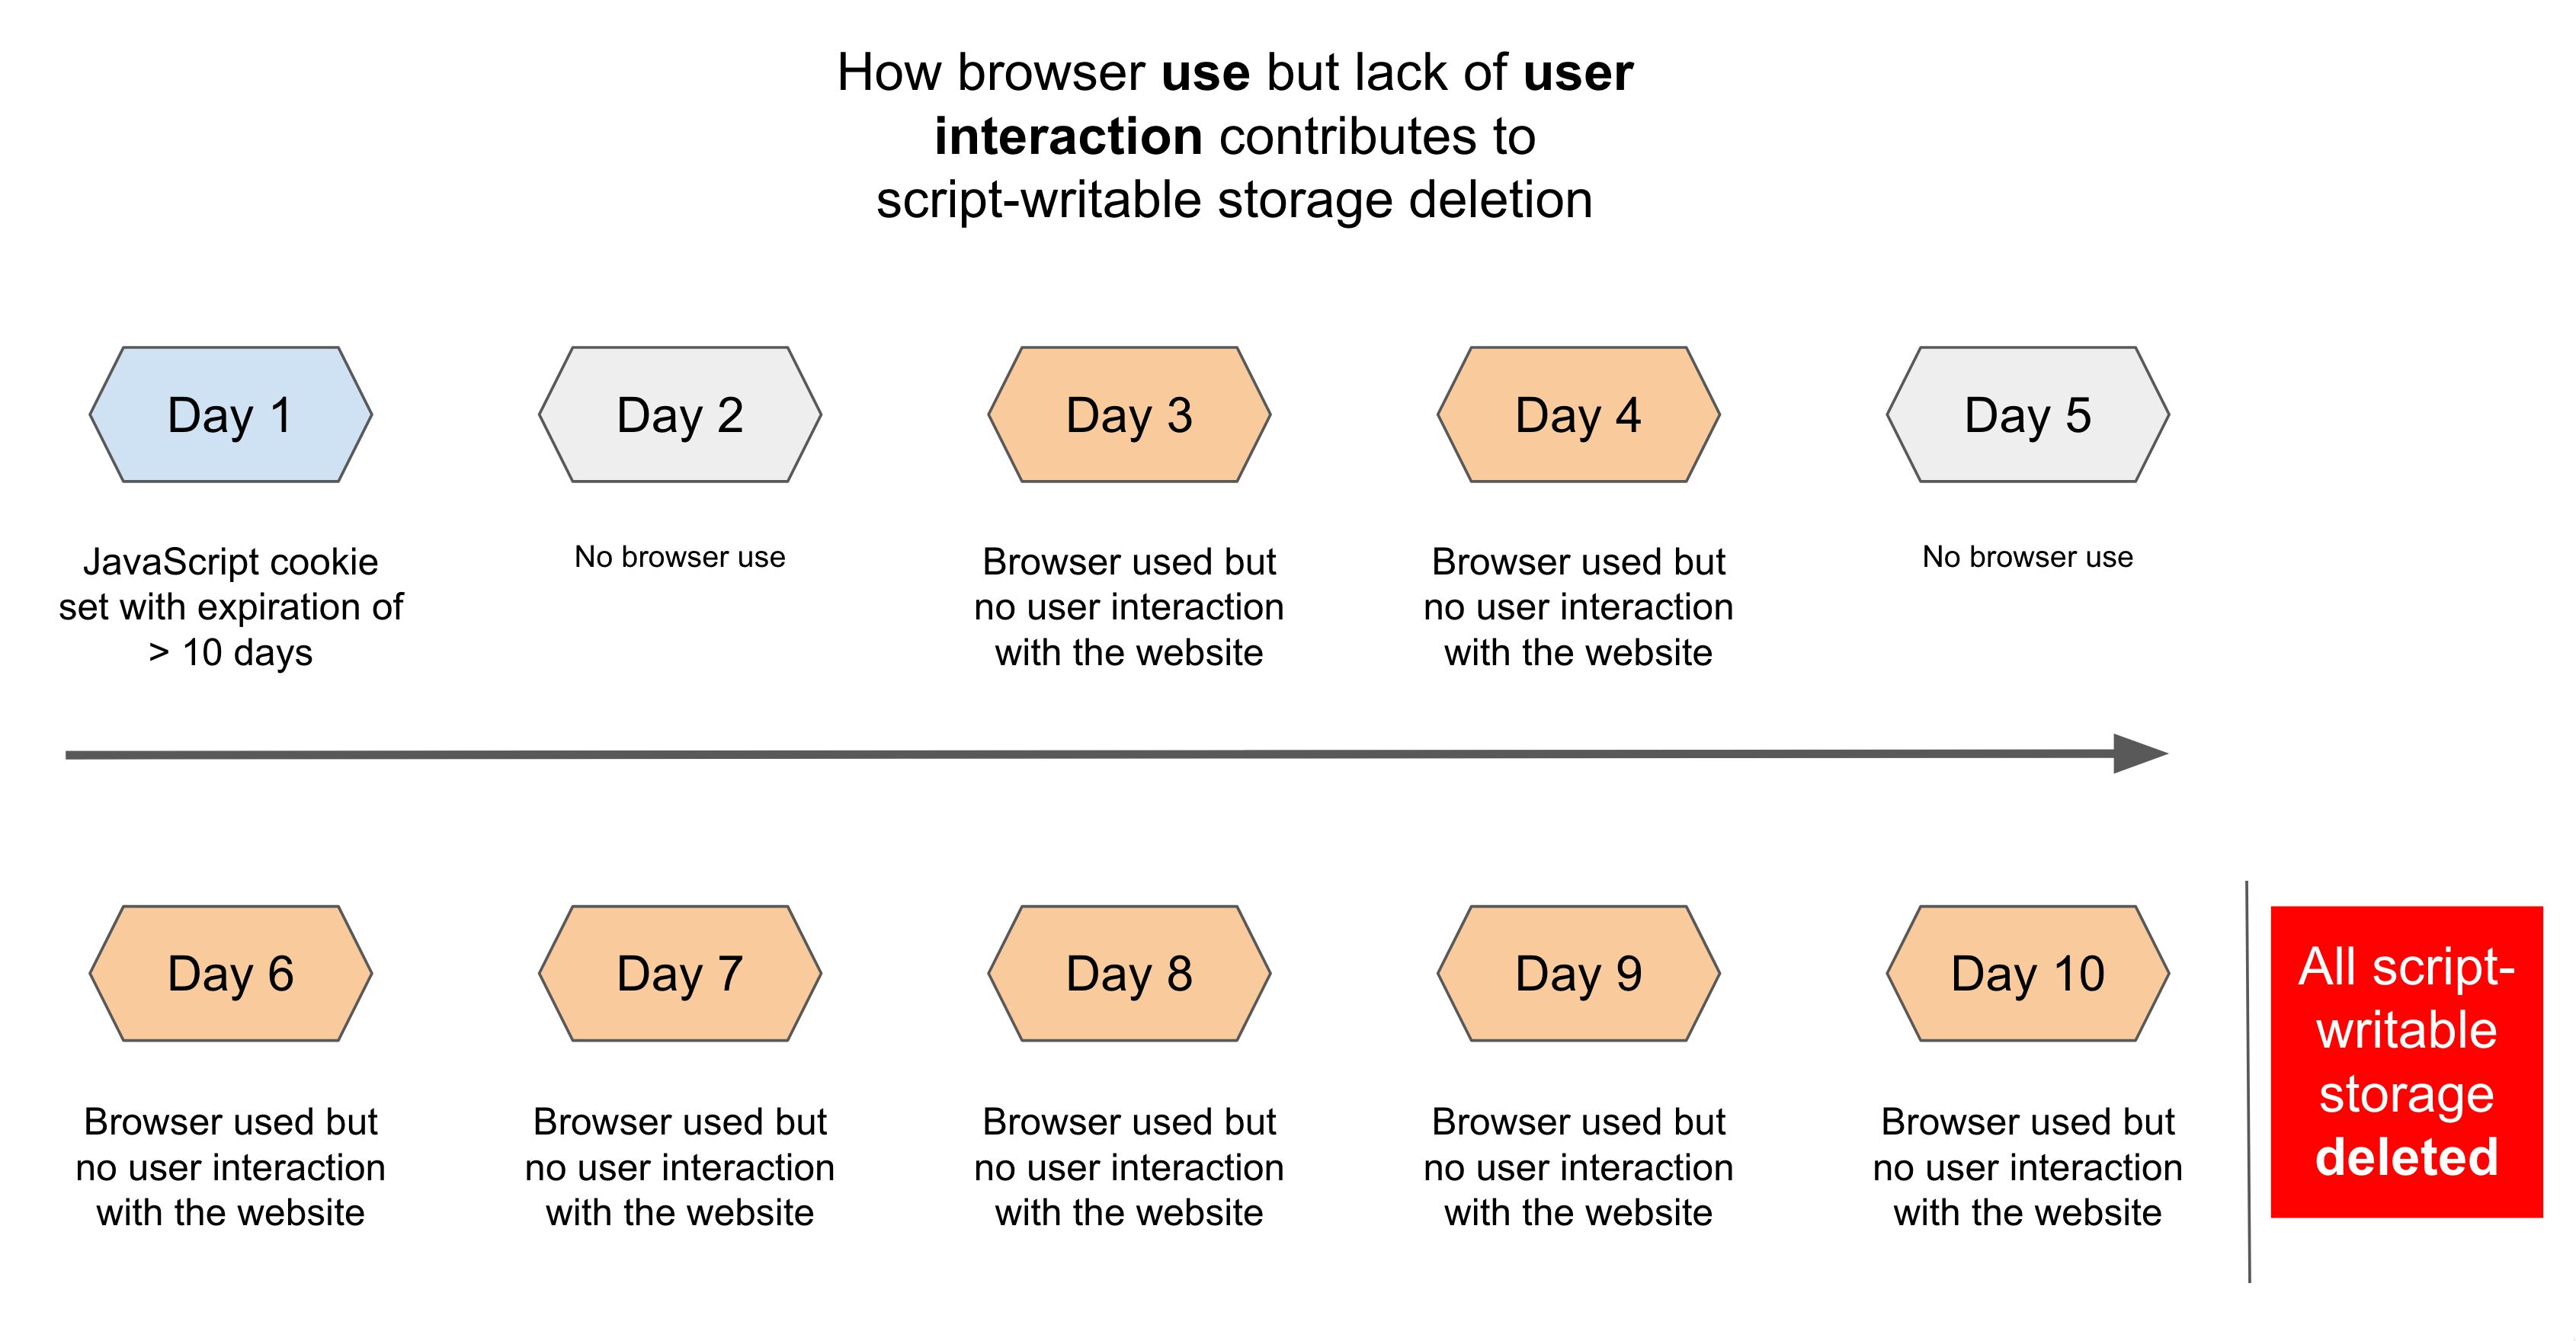 How WebKit browser use but lack of user interaction contributes to script-writable storage deletion.